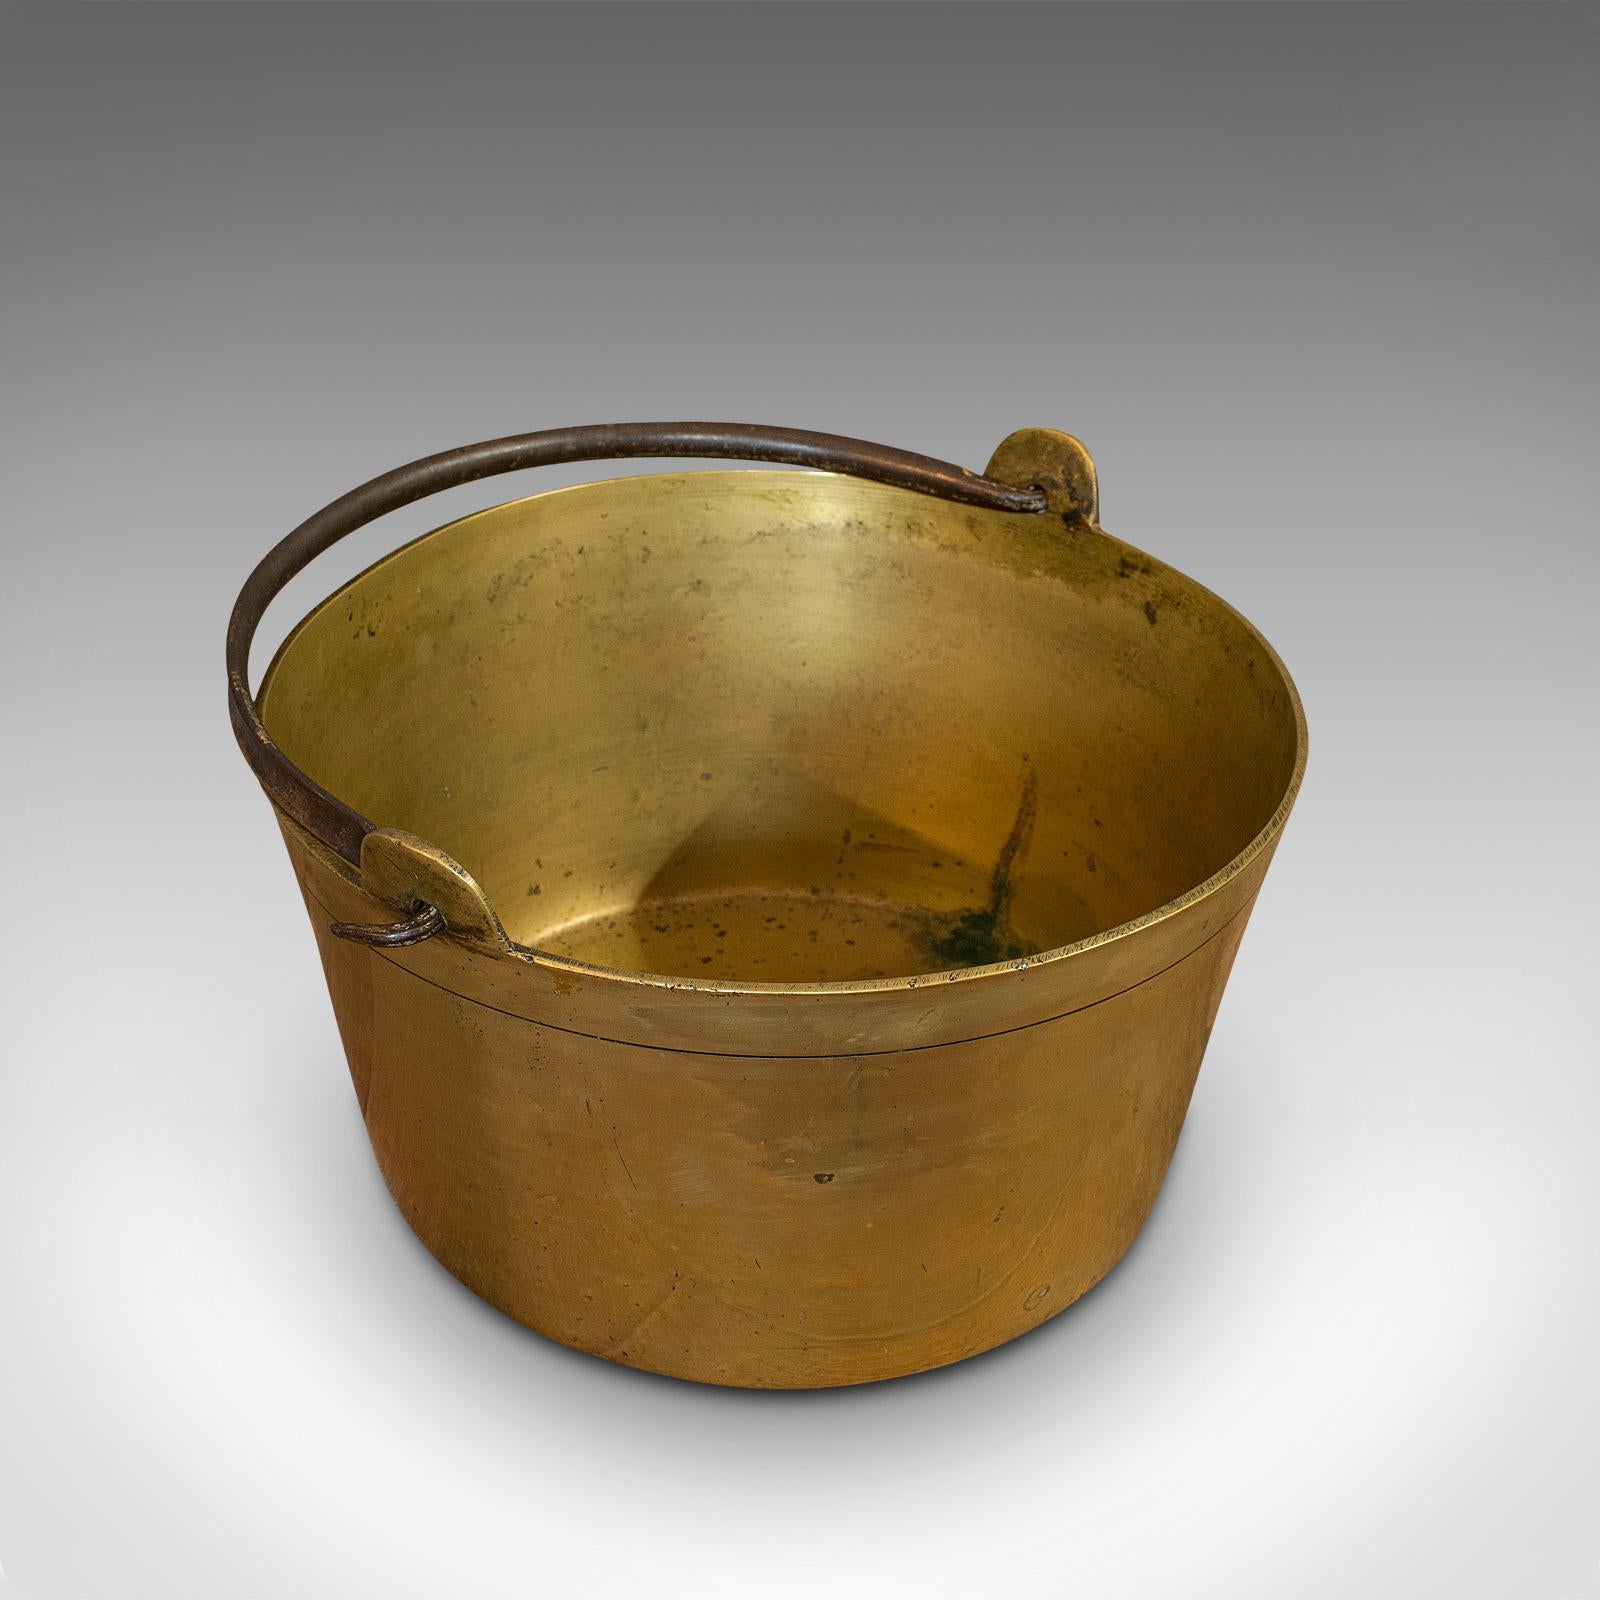 19th Century Antique Jam Pan, French, Solid Brass, Artisan Kitchen Pot, Victorian, circa 1900 For Sale